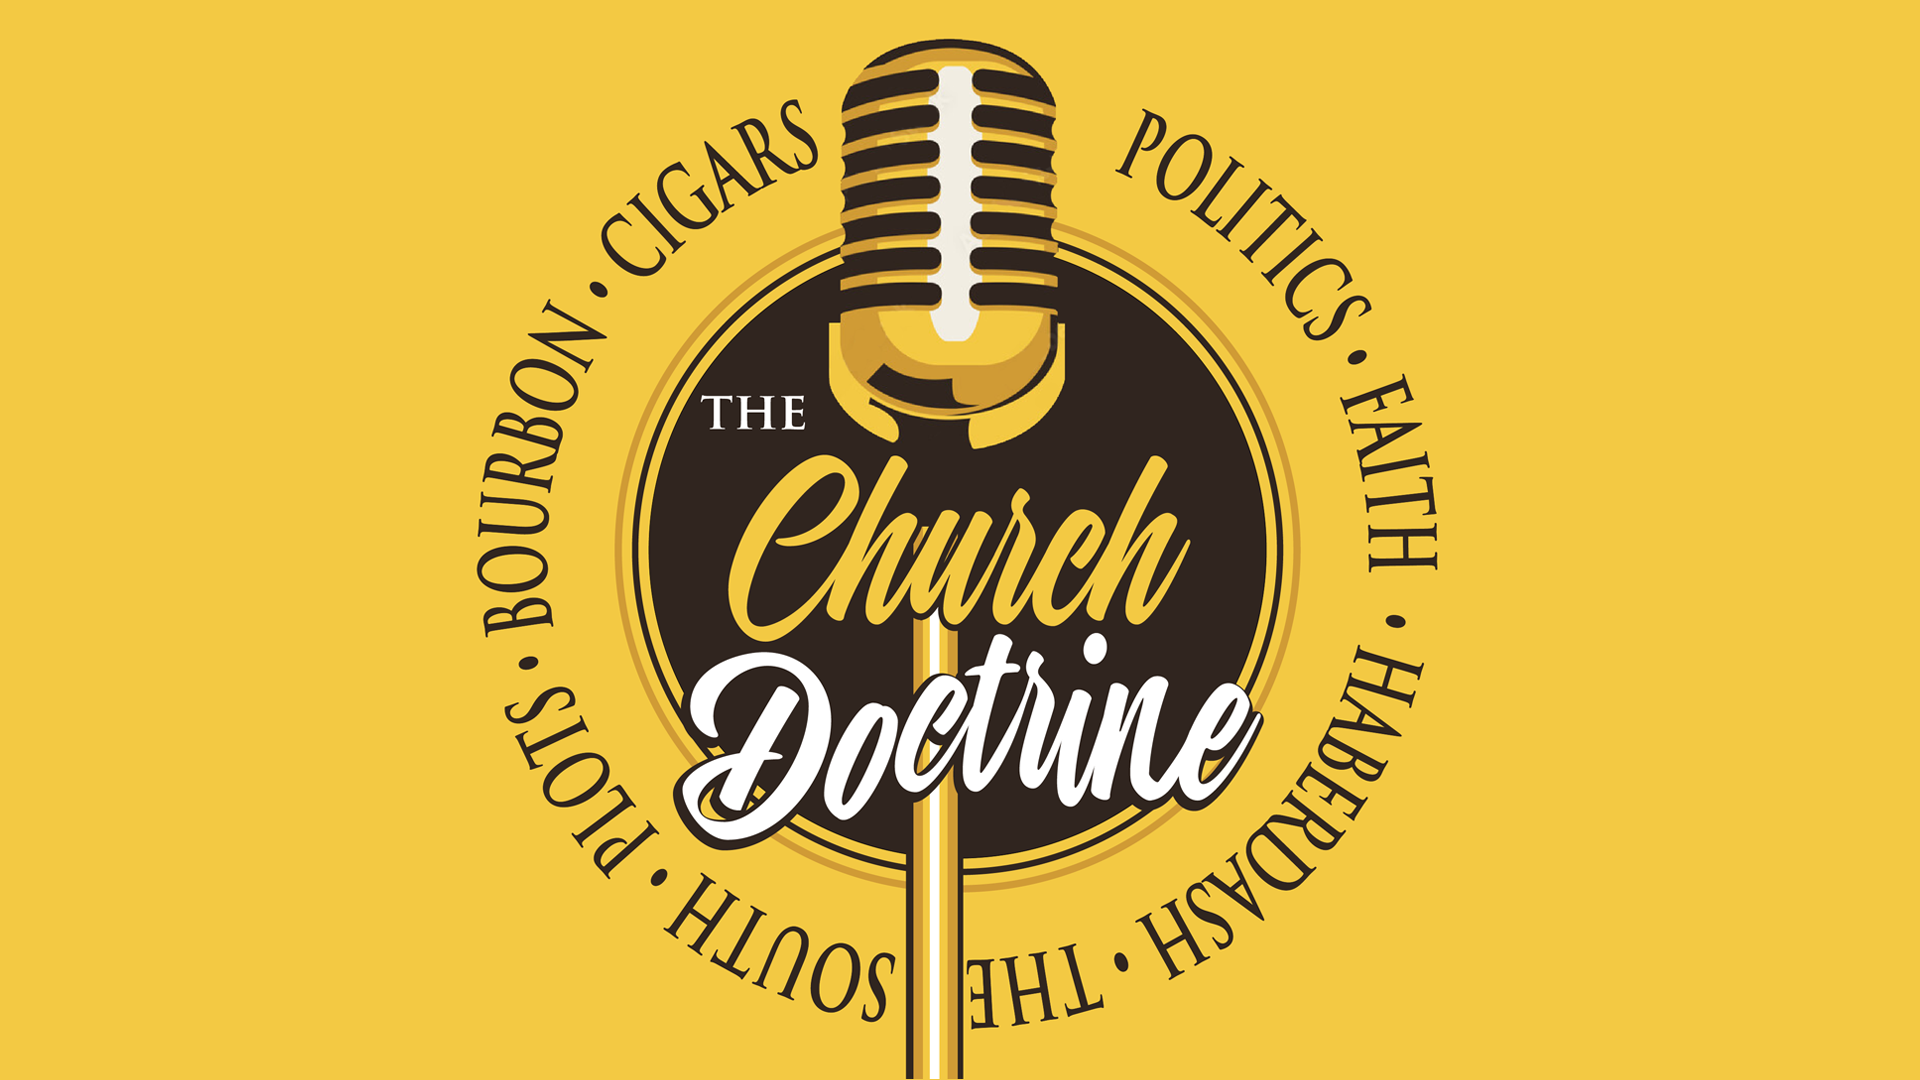 The Church Doctrine Episode 2 - O' Brother, Wherefore Art Thou?